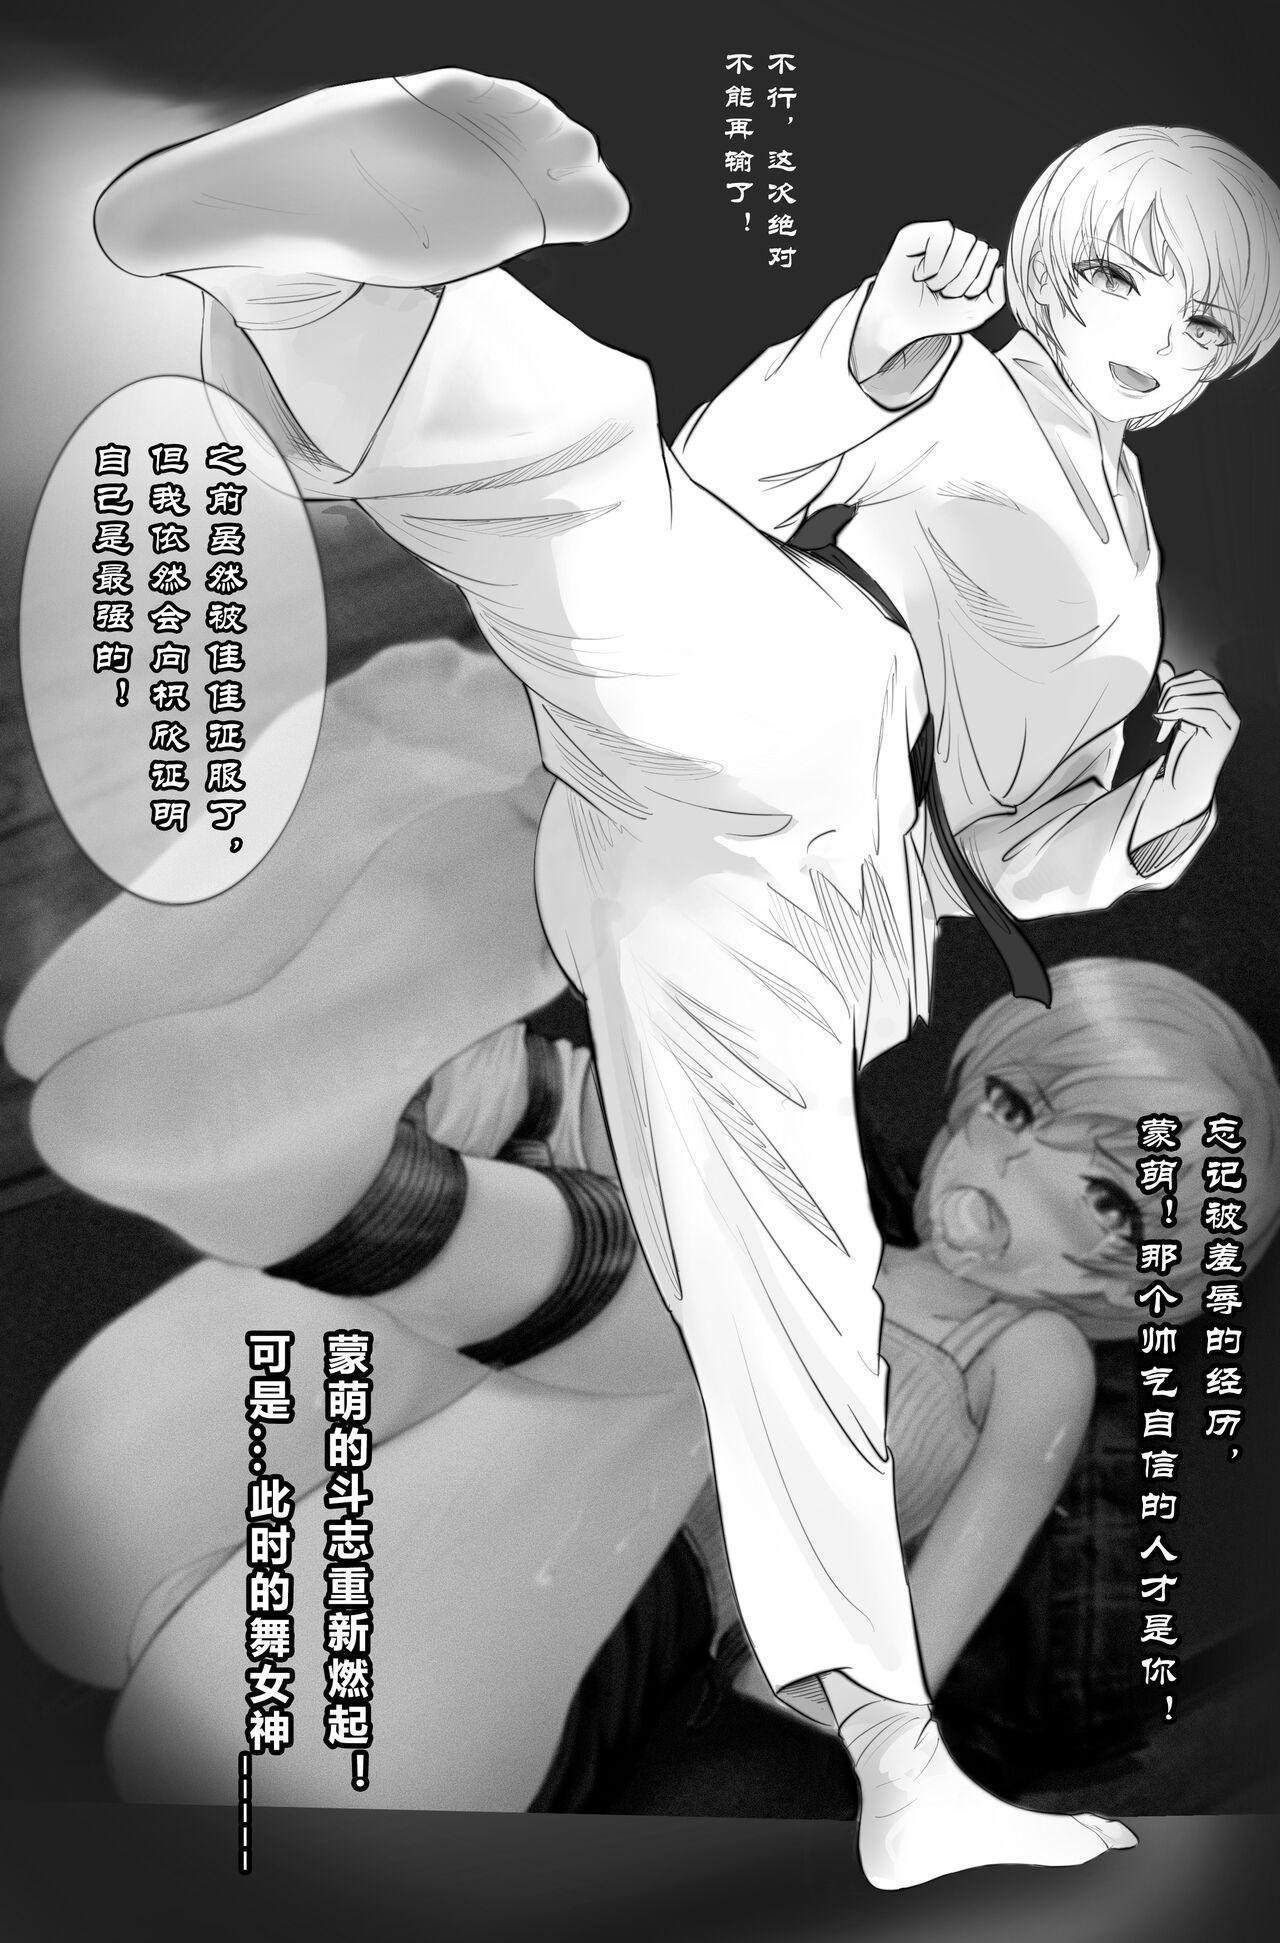 Man GOAT-goat Ⅴ special chapter - Original Flashing - Picture 3